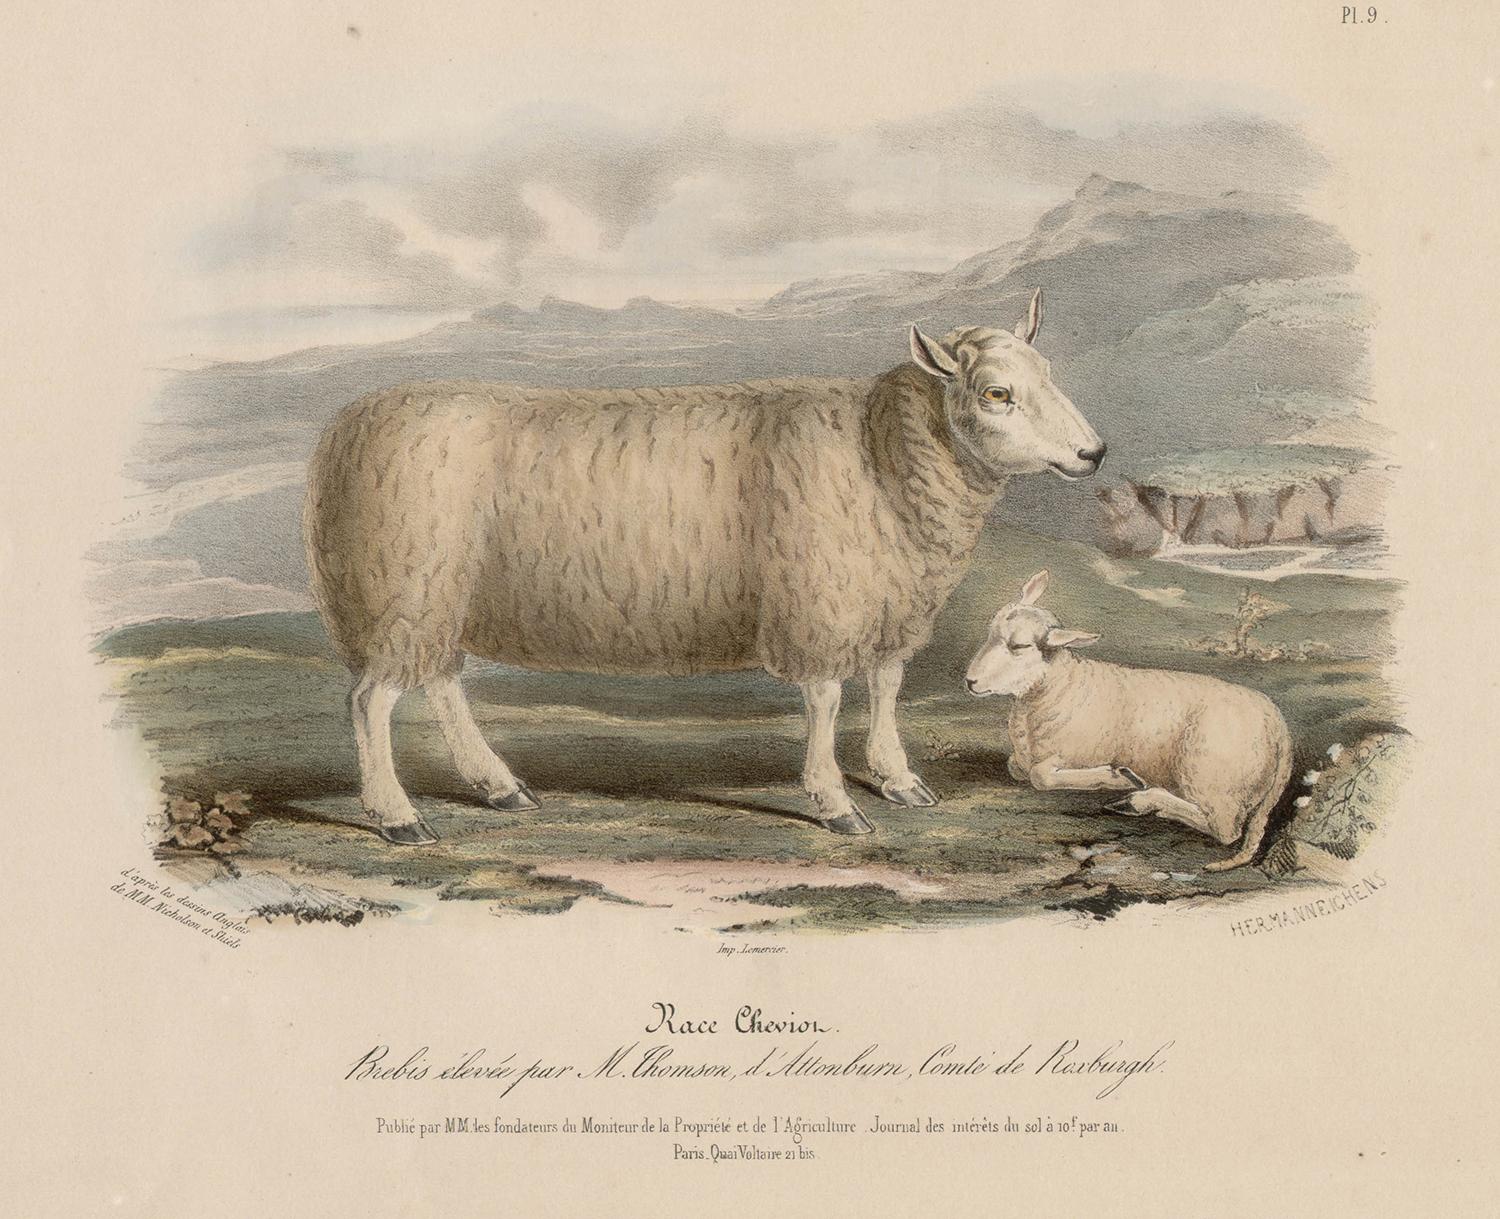 After William Shiels Animal Print - Cheviot Sheep, lithograph with original hand-colouring, circa 1845